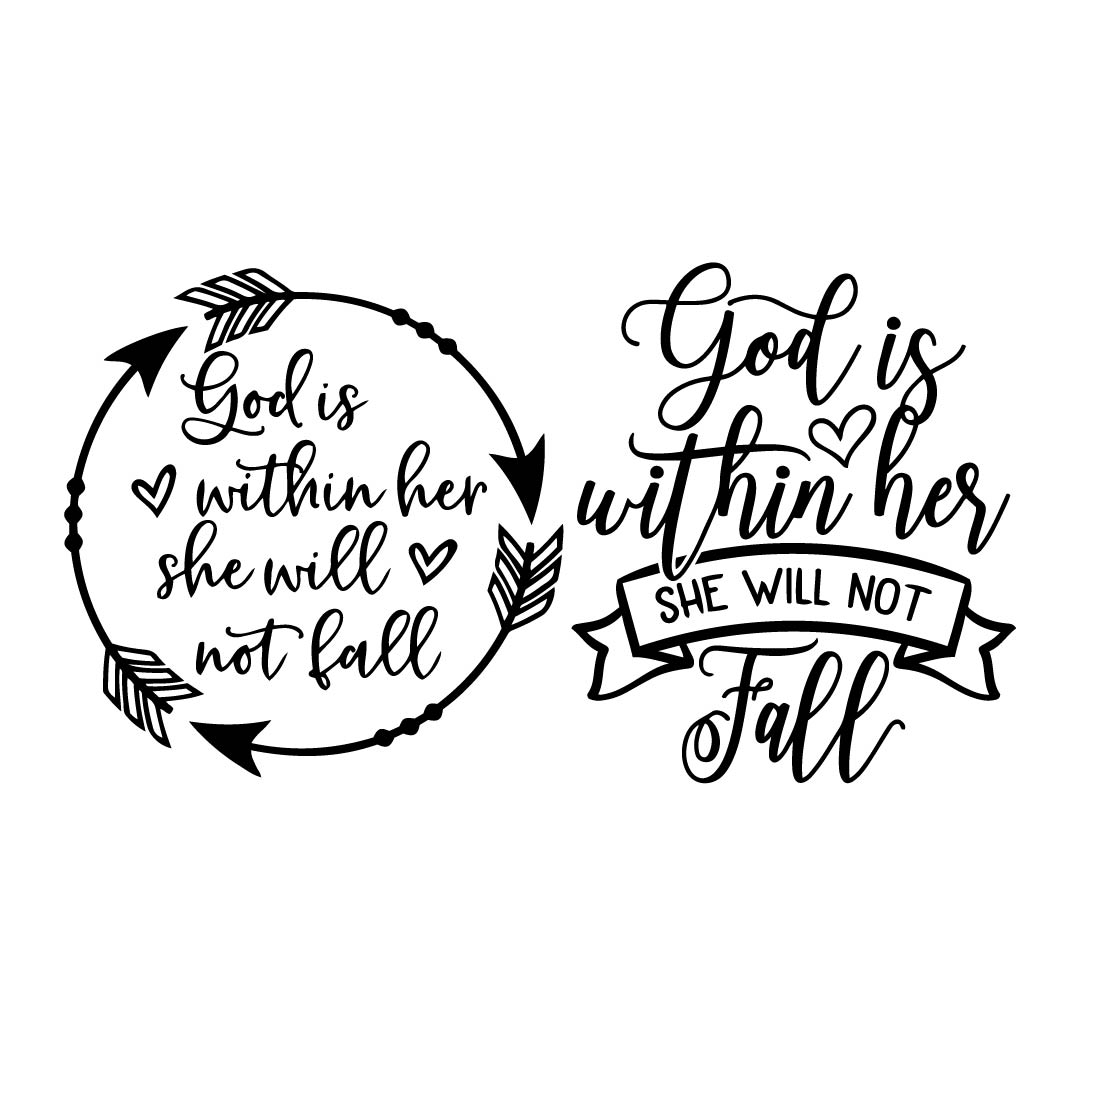 God Is Within Her She Will Not Fall Svg, Christian Svg, Faith Svg, Psalm 46:5, Bible Verse Svg, Psalm Svg, Scripture Svg, Christian Woman cover image.